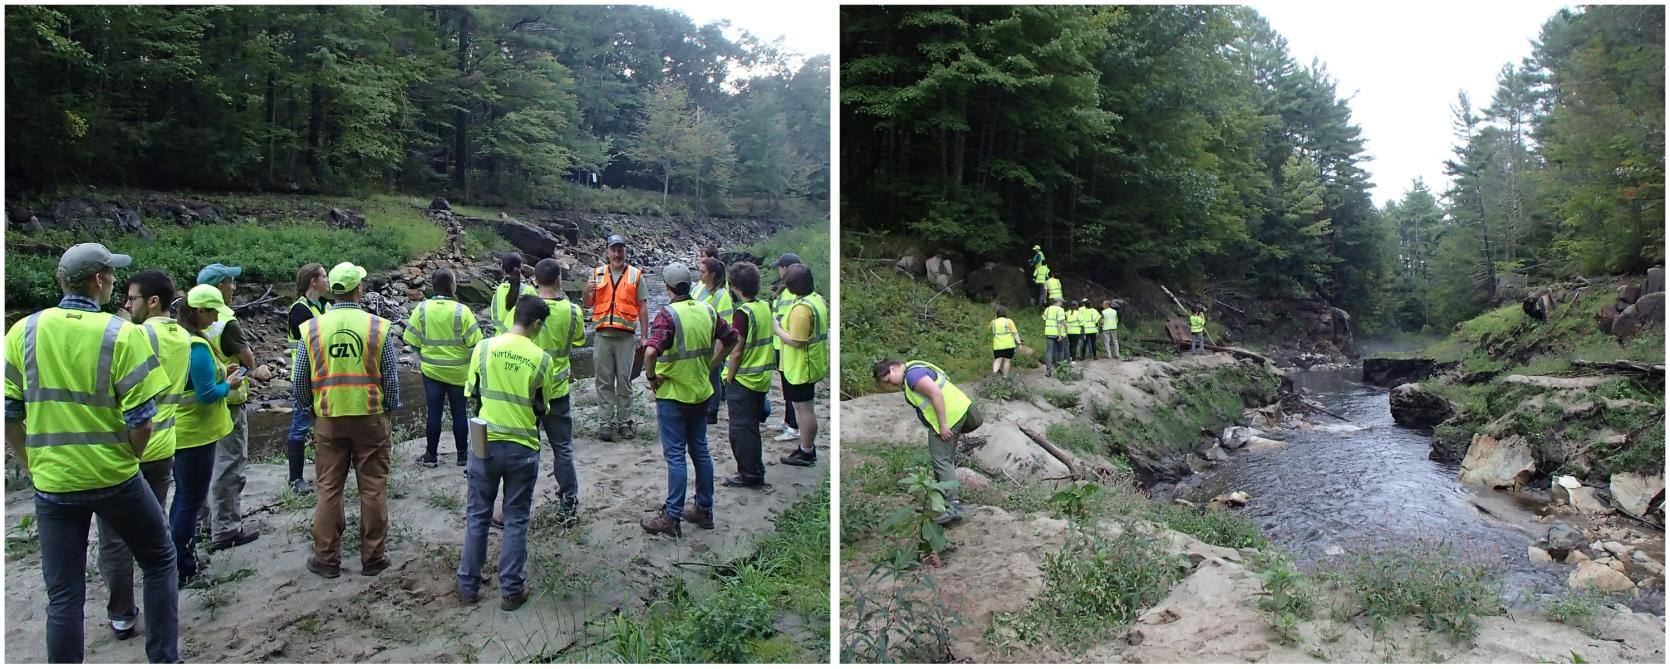 DER and Dam Removal Practicum students visit the site of recent dam removal